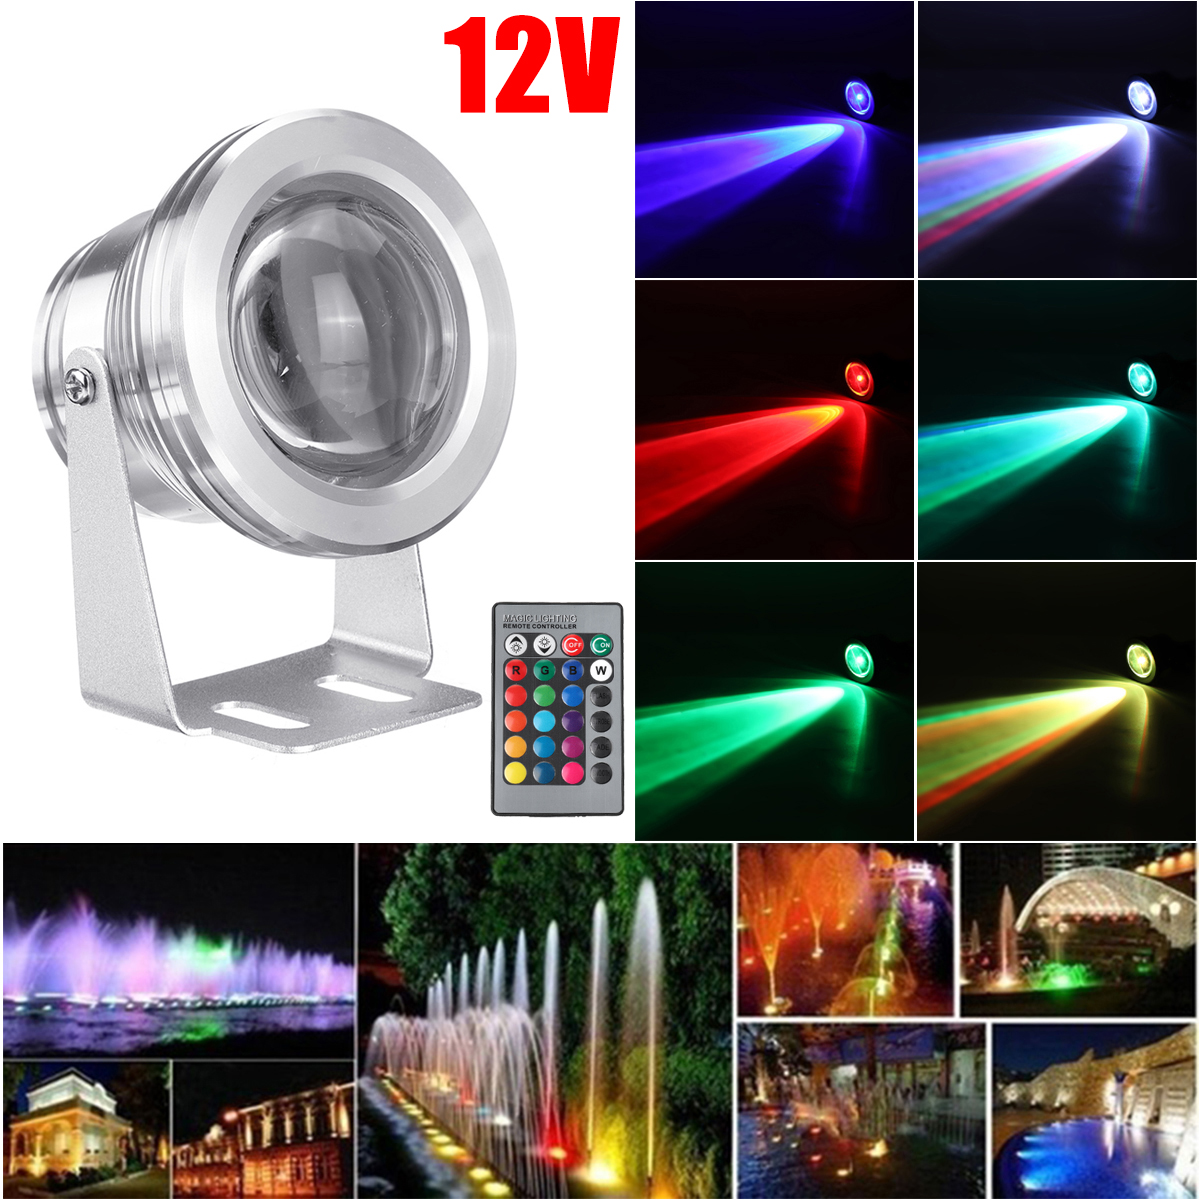 Find DC12V 10W RGB LED Underwater Light Waterproof Fountain Pool Spotlight With Remote Control for Sale on Gipsybee.com with cryptocurrencies